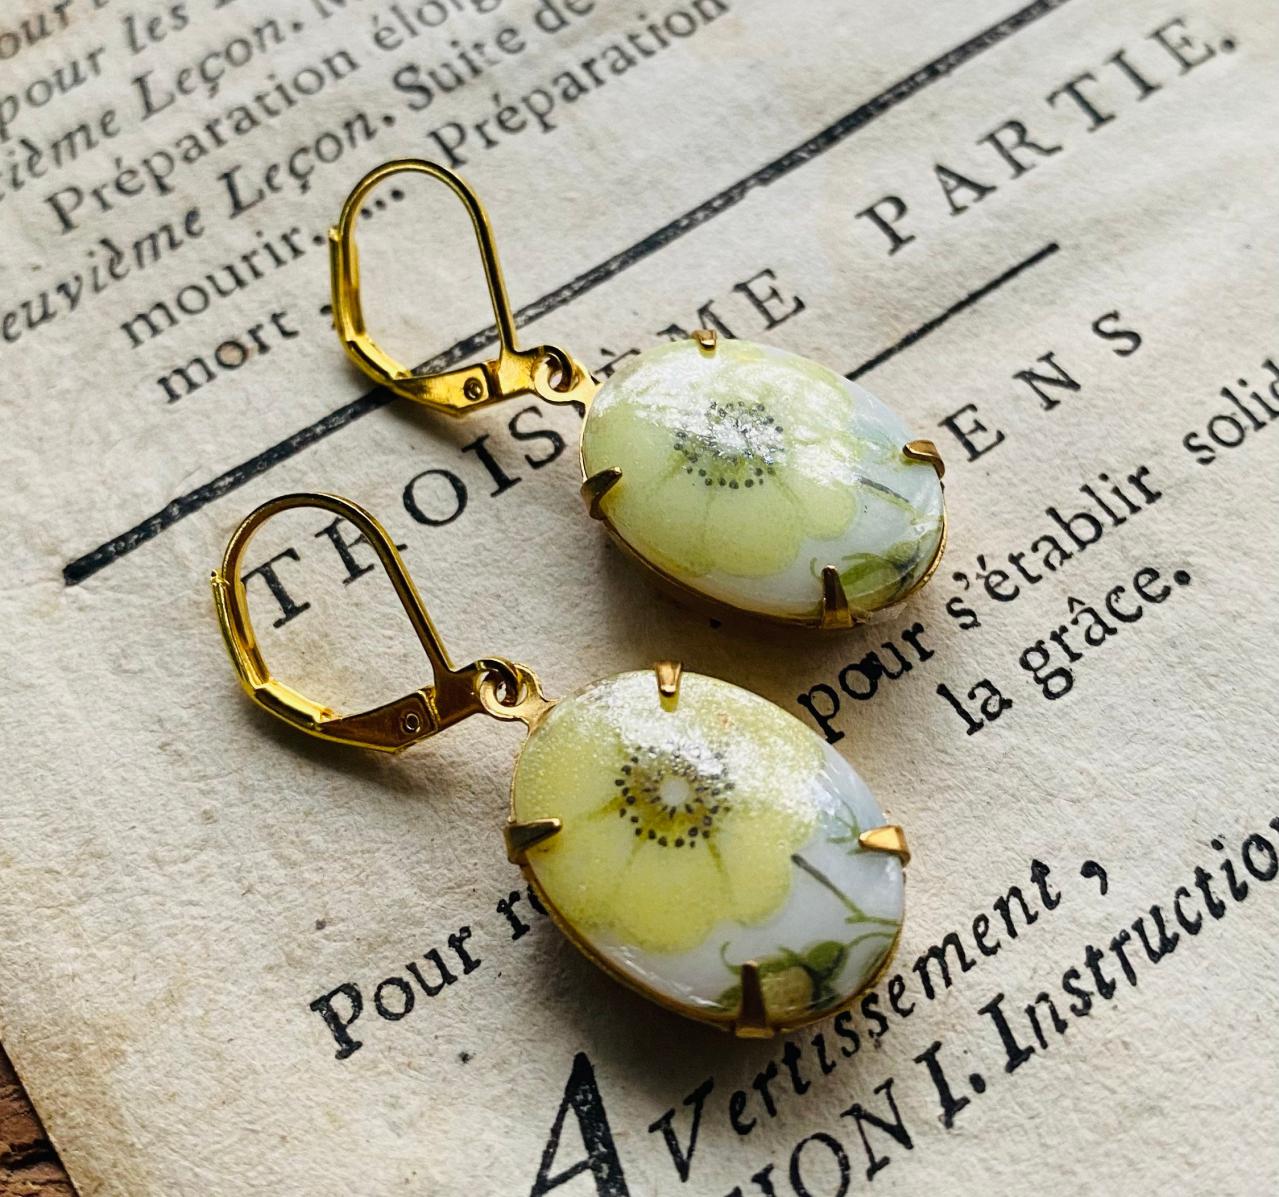 Vintage Floral Earrings Cabochons Vintage Style Bridesmaid Jewelry Brass Old Fashioned Daisy Flower Jewelry 1960s Retro